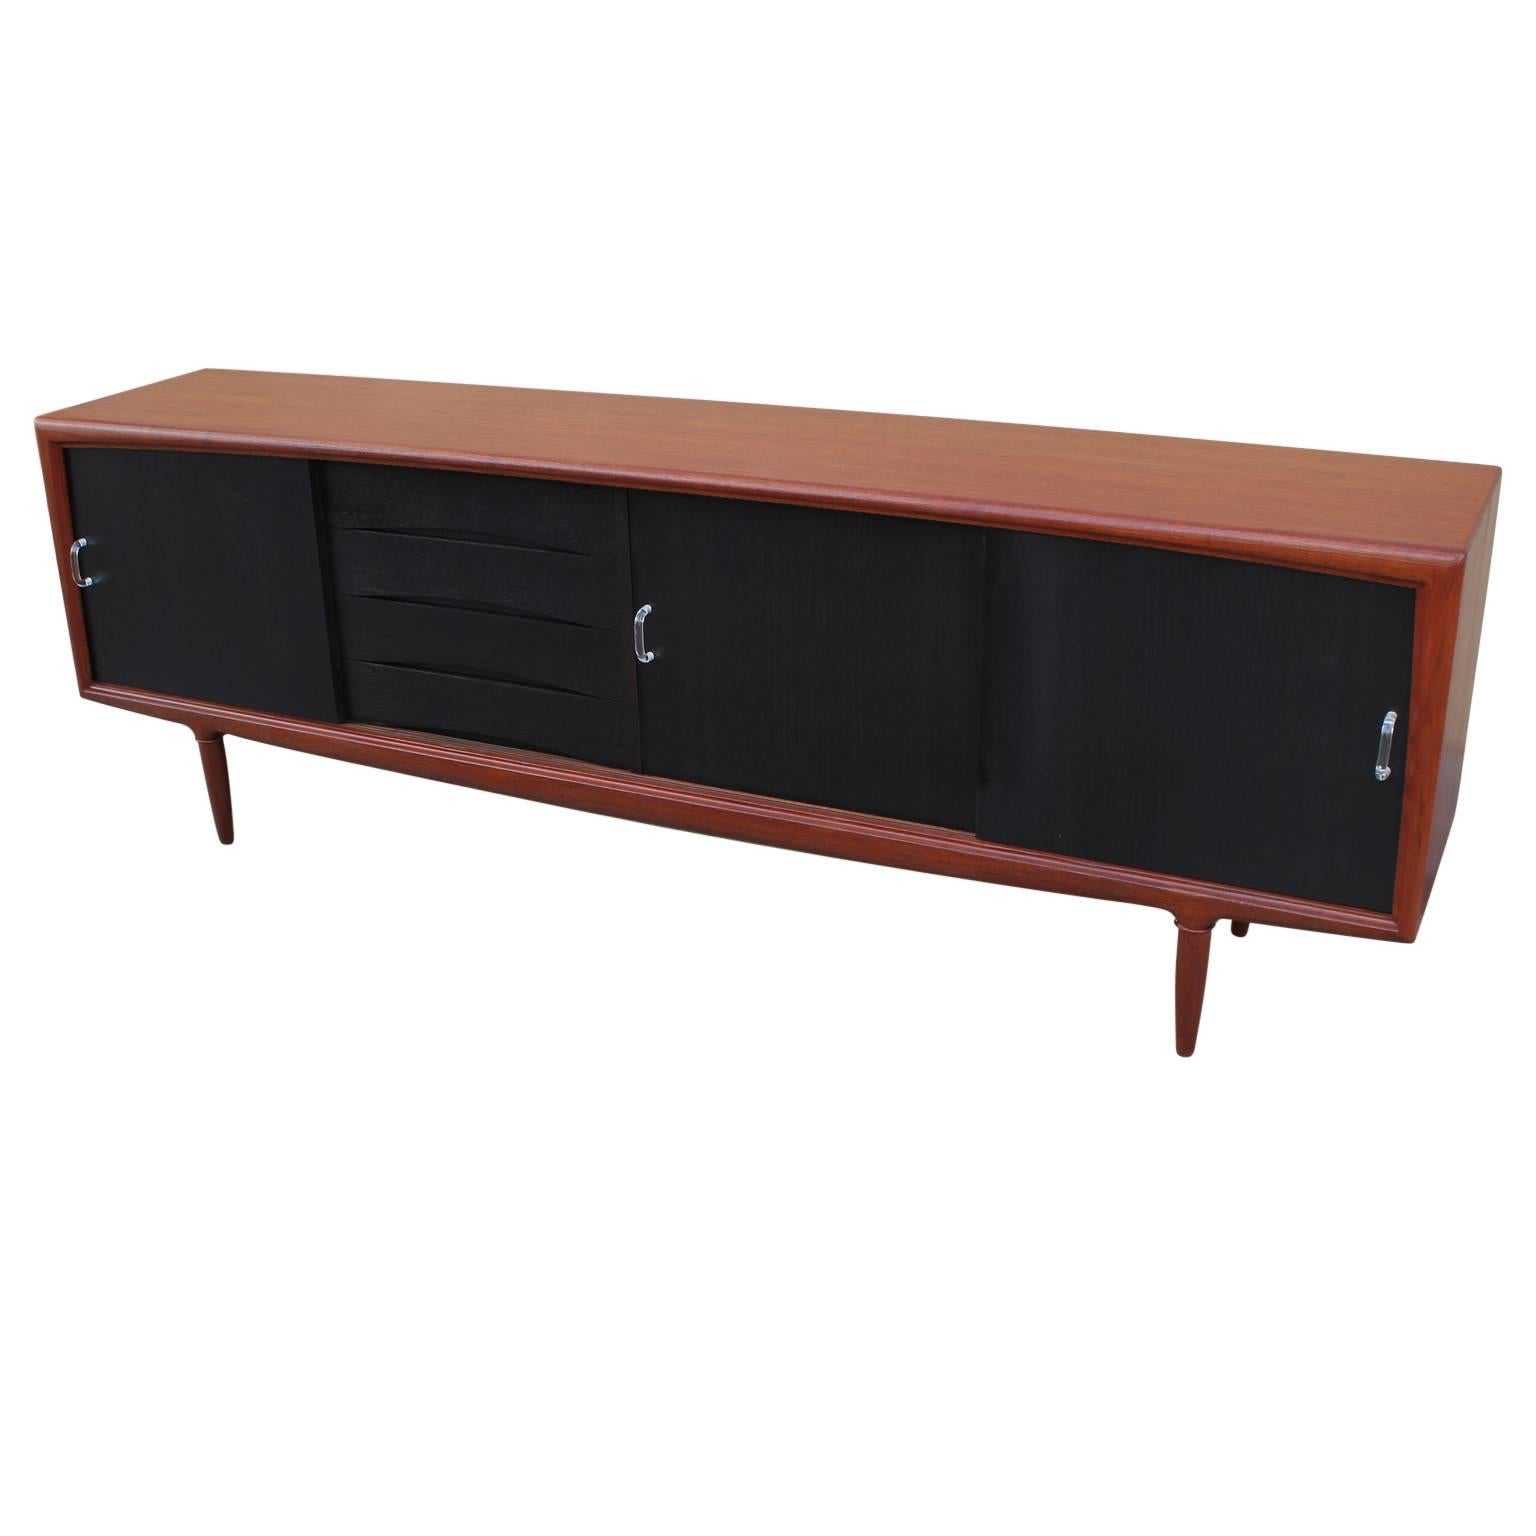 Two-tone credenza / sideboard with sliding doors and shelving perfect for organization and storage. Made in Denmark in the early 1960s. The sideboard has been slightly customized with a charcoal stained front and lucite handles. 